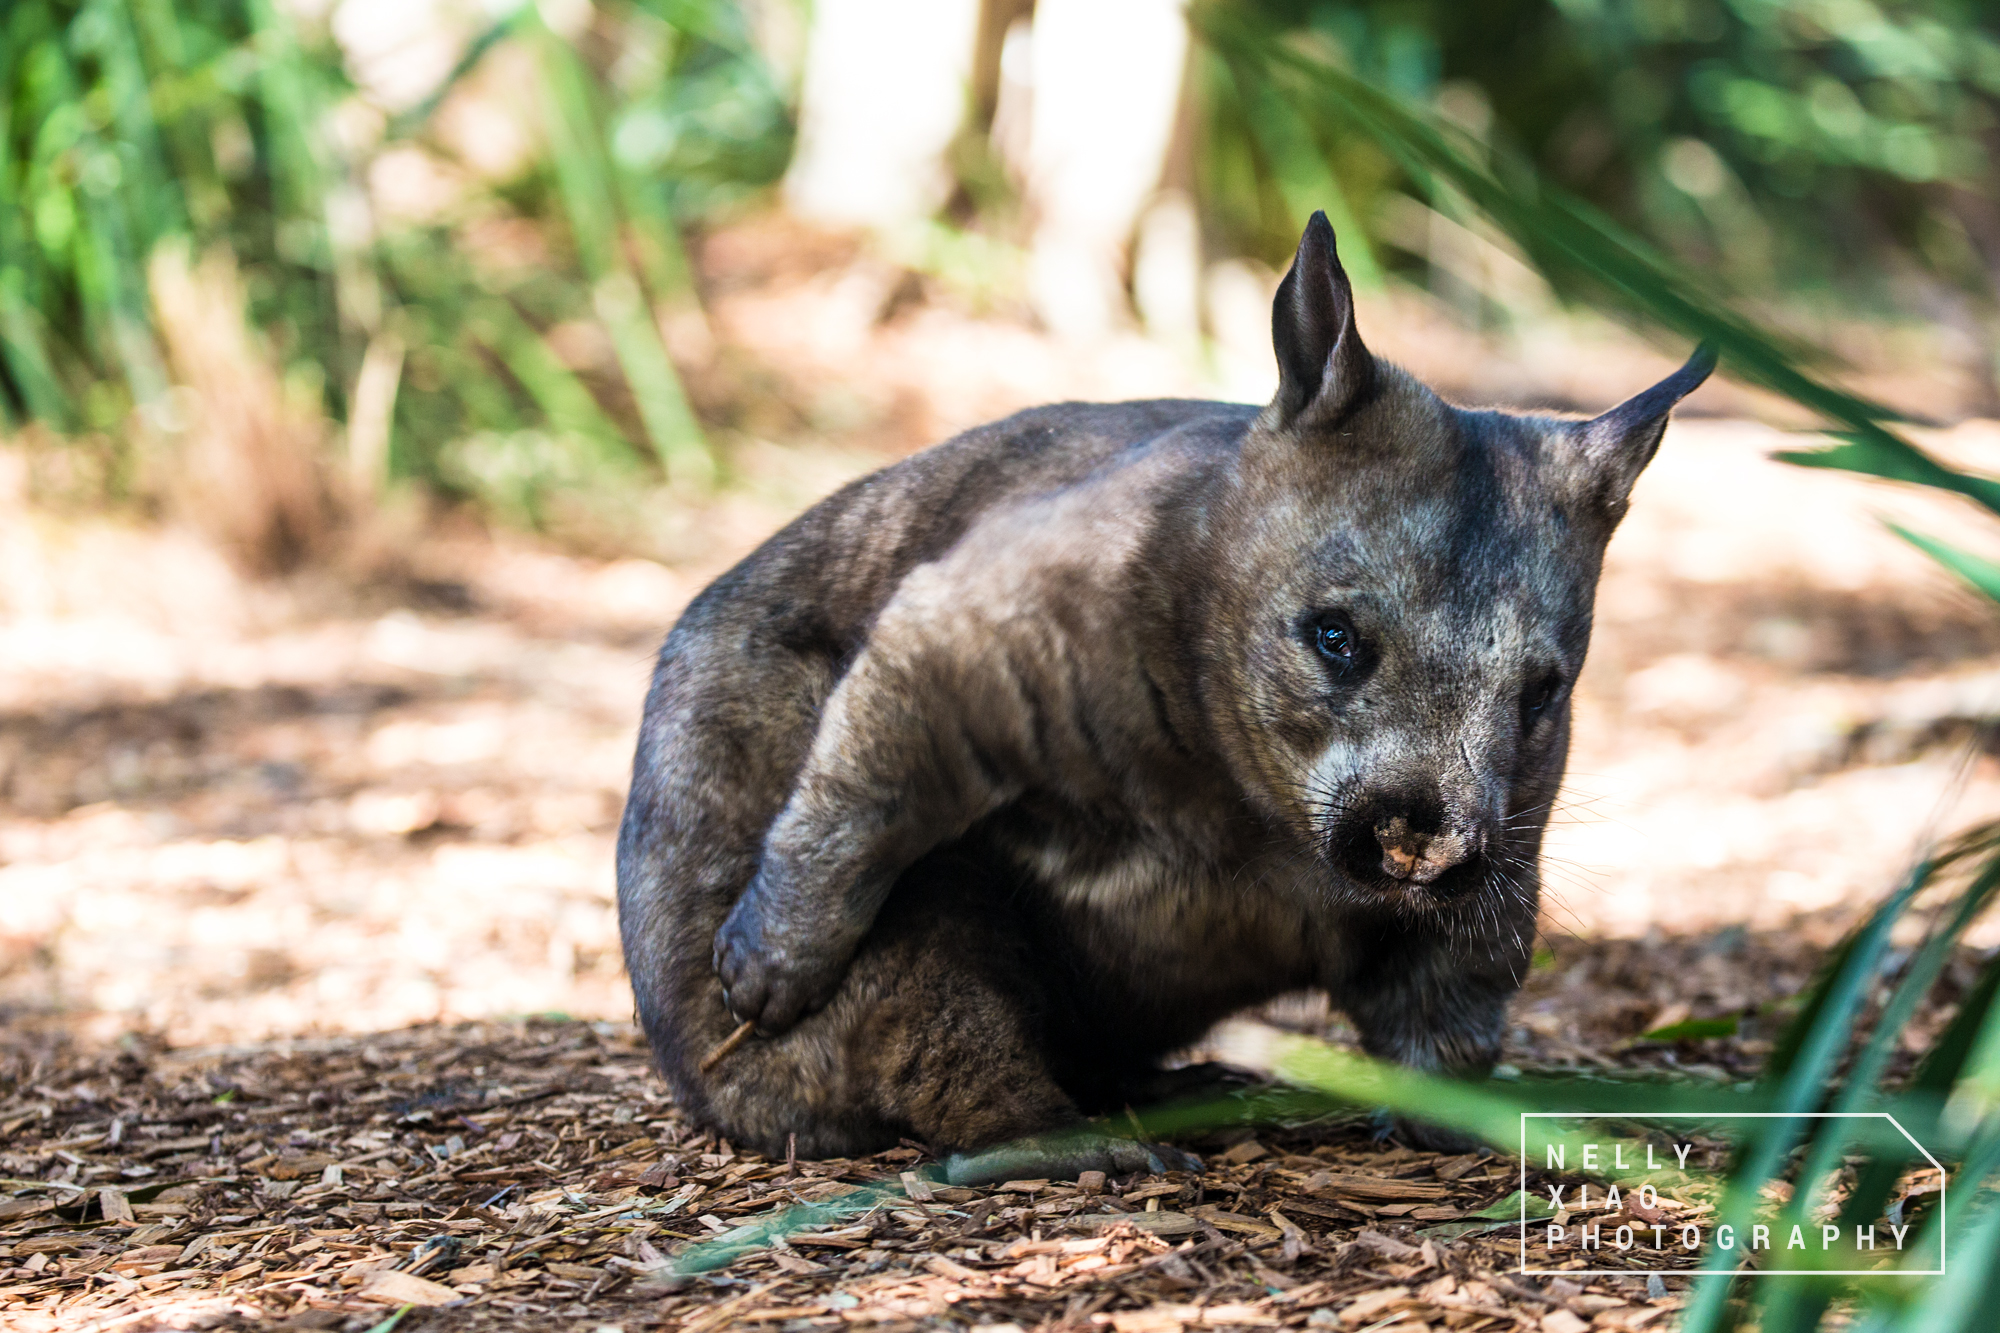   Southern hairy-nosed wombat joey,   Southern border NSW 2017 